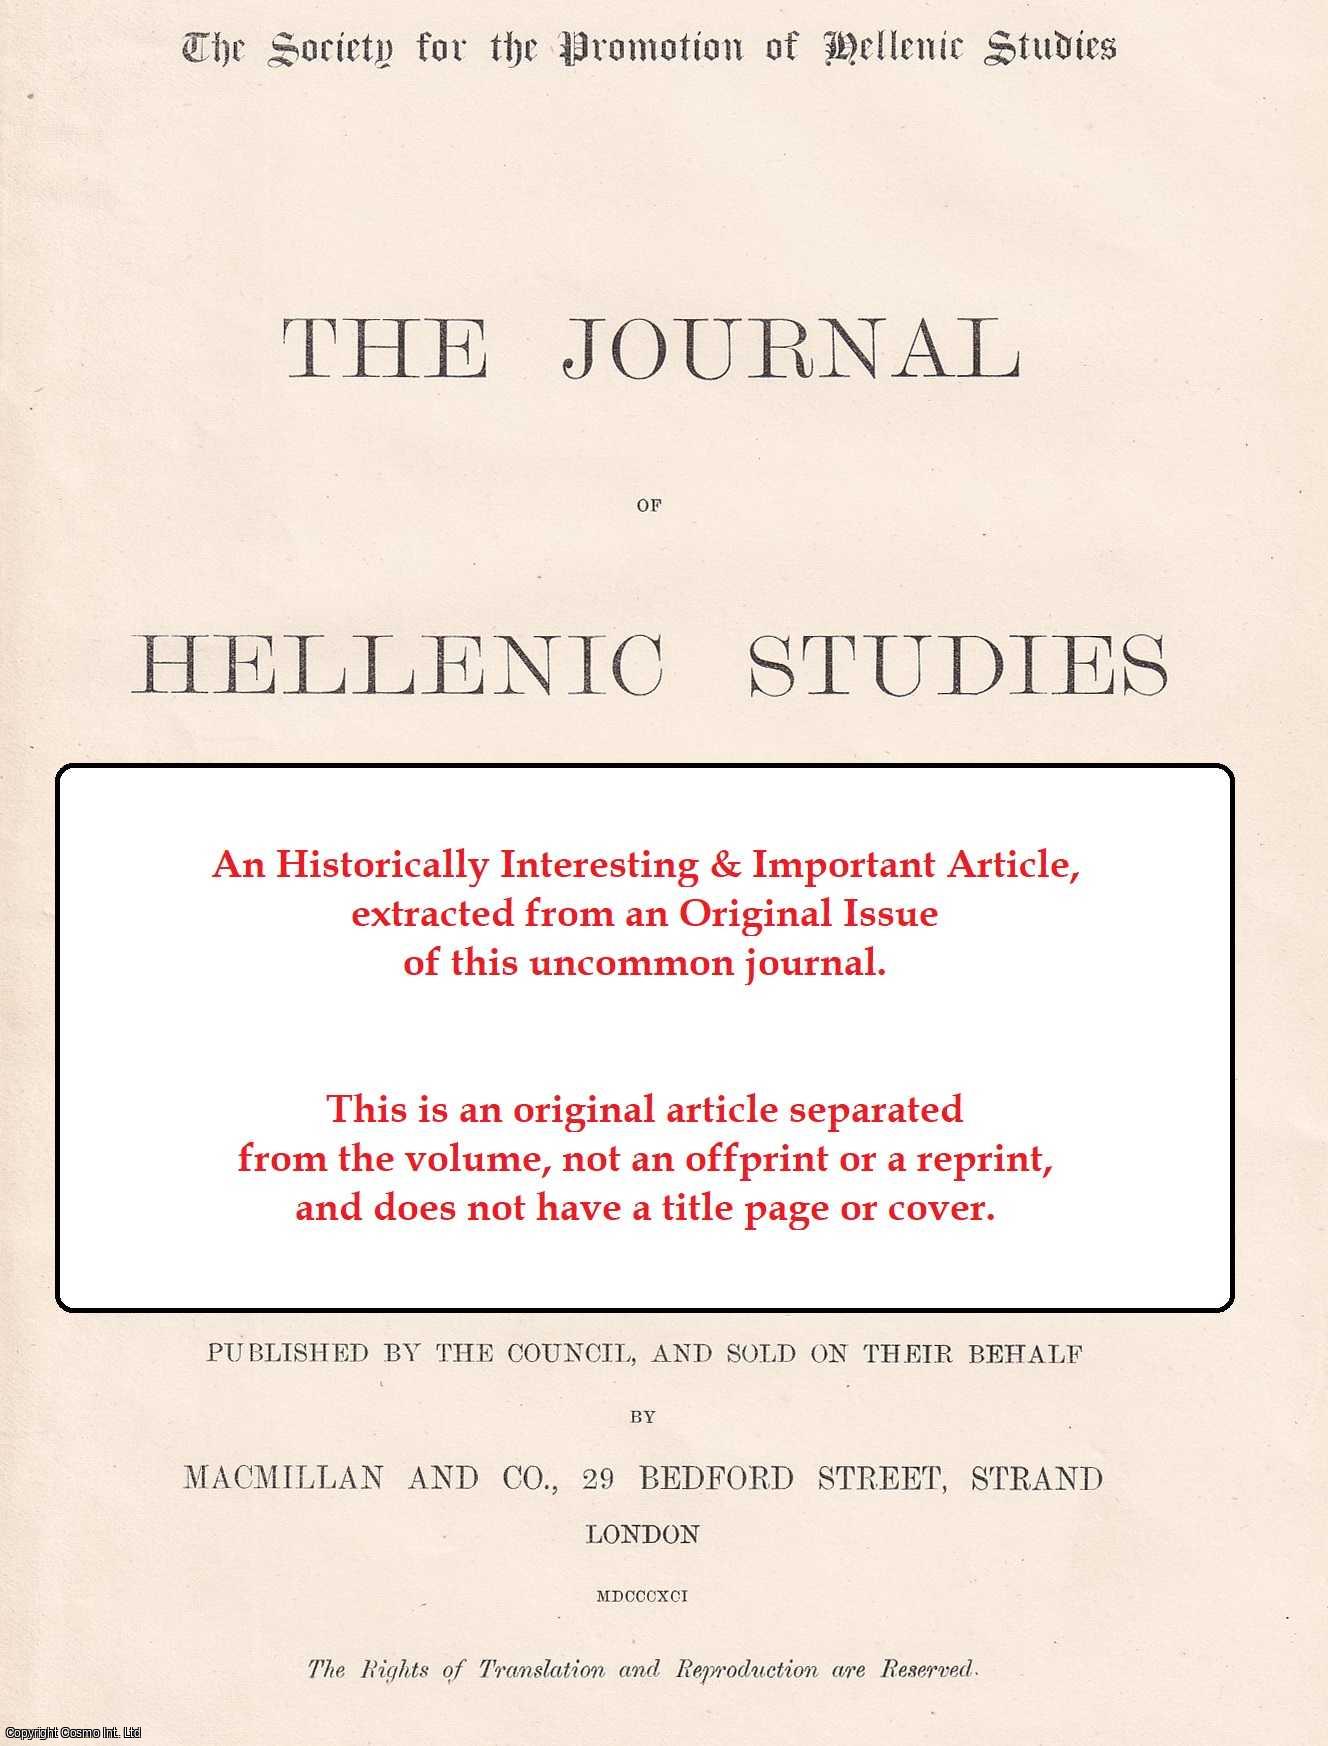 R.C. Bosanquet and Ronald M. Burrows - Pylos and Sphacteria. An uncommon original article from the journal of Hellenic studies, 1898.